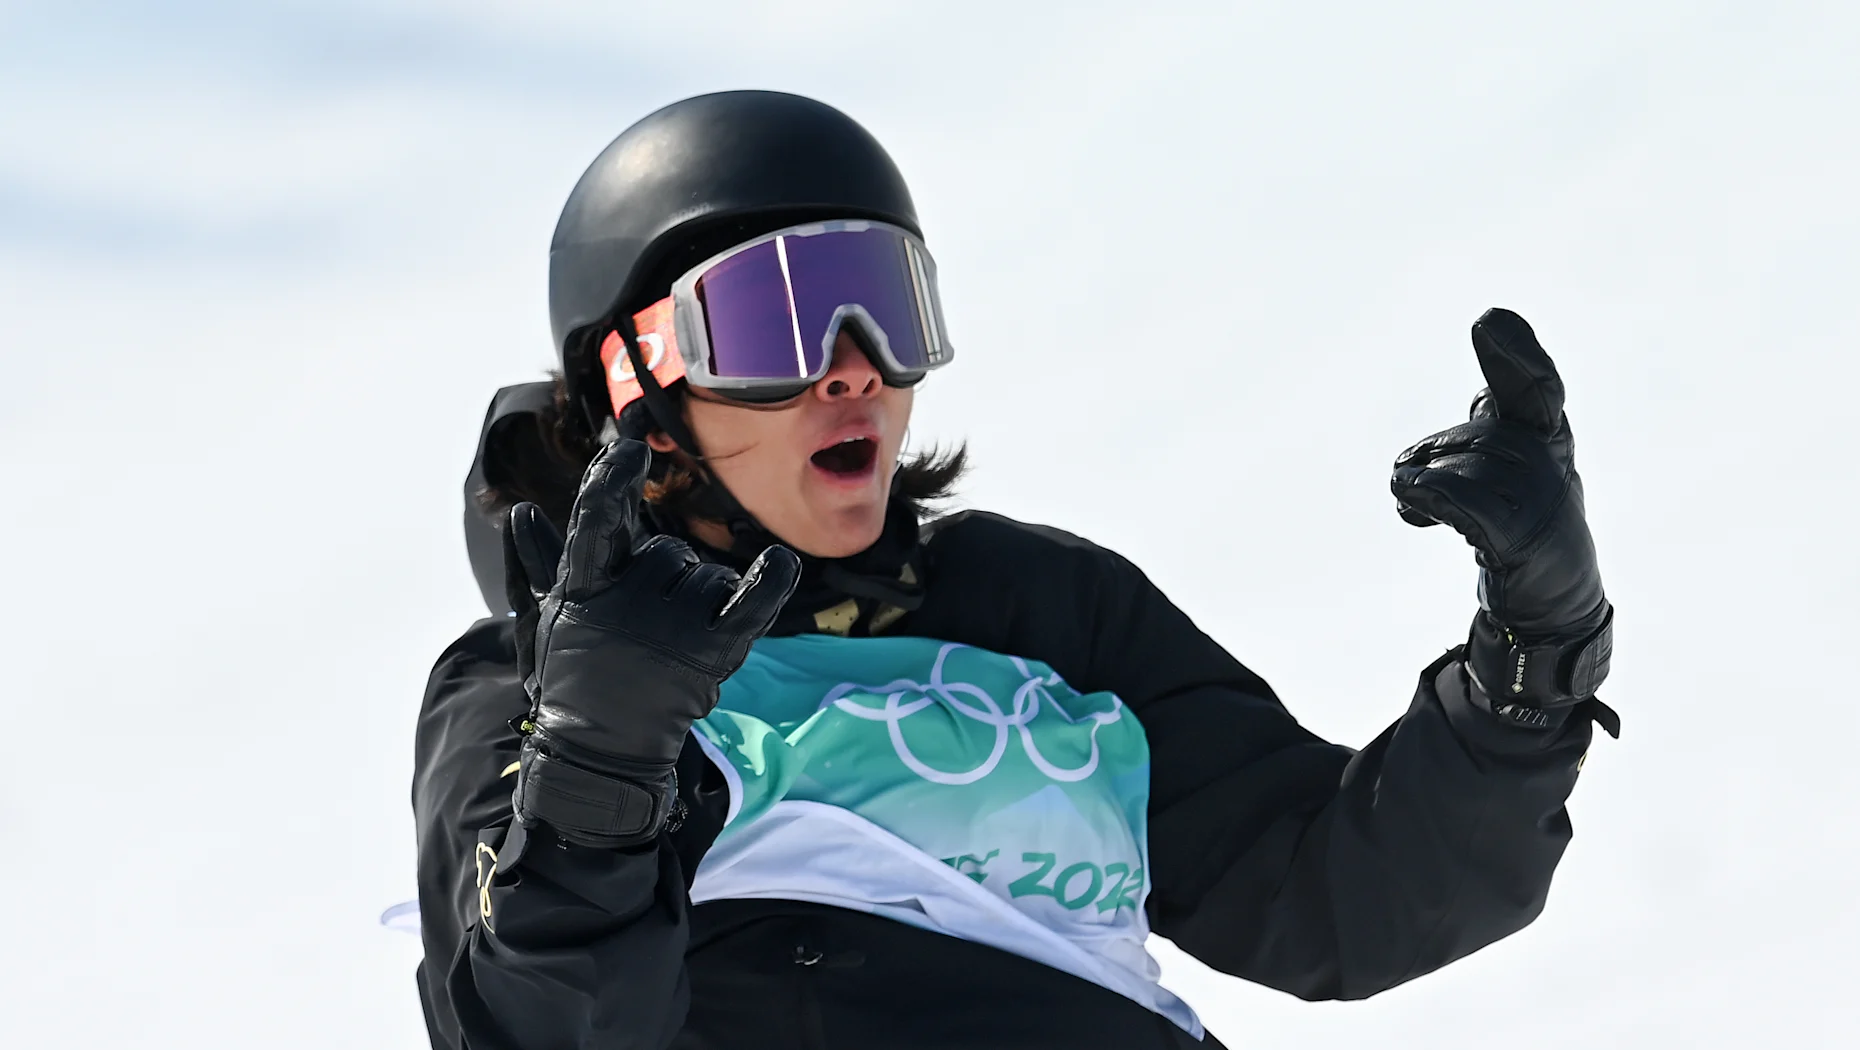 Su Yiming’s double 1800s seal Team China gold in men’s snowboard big air